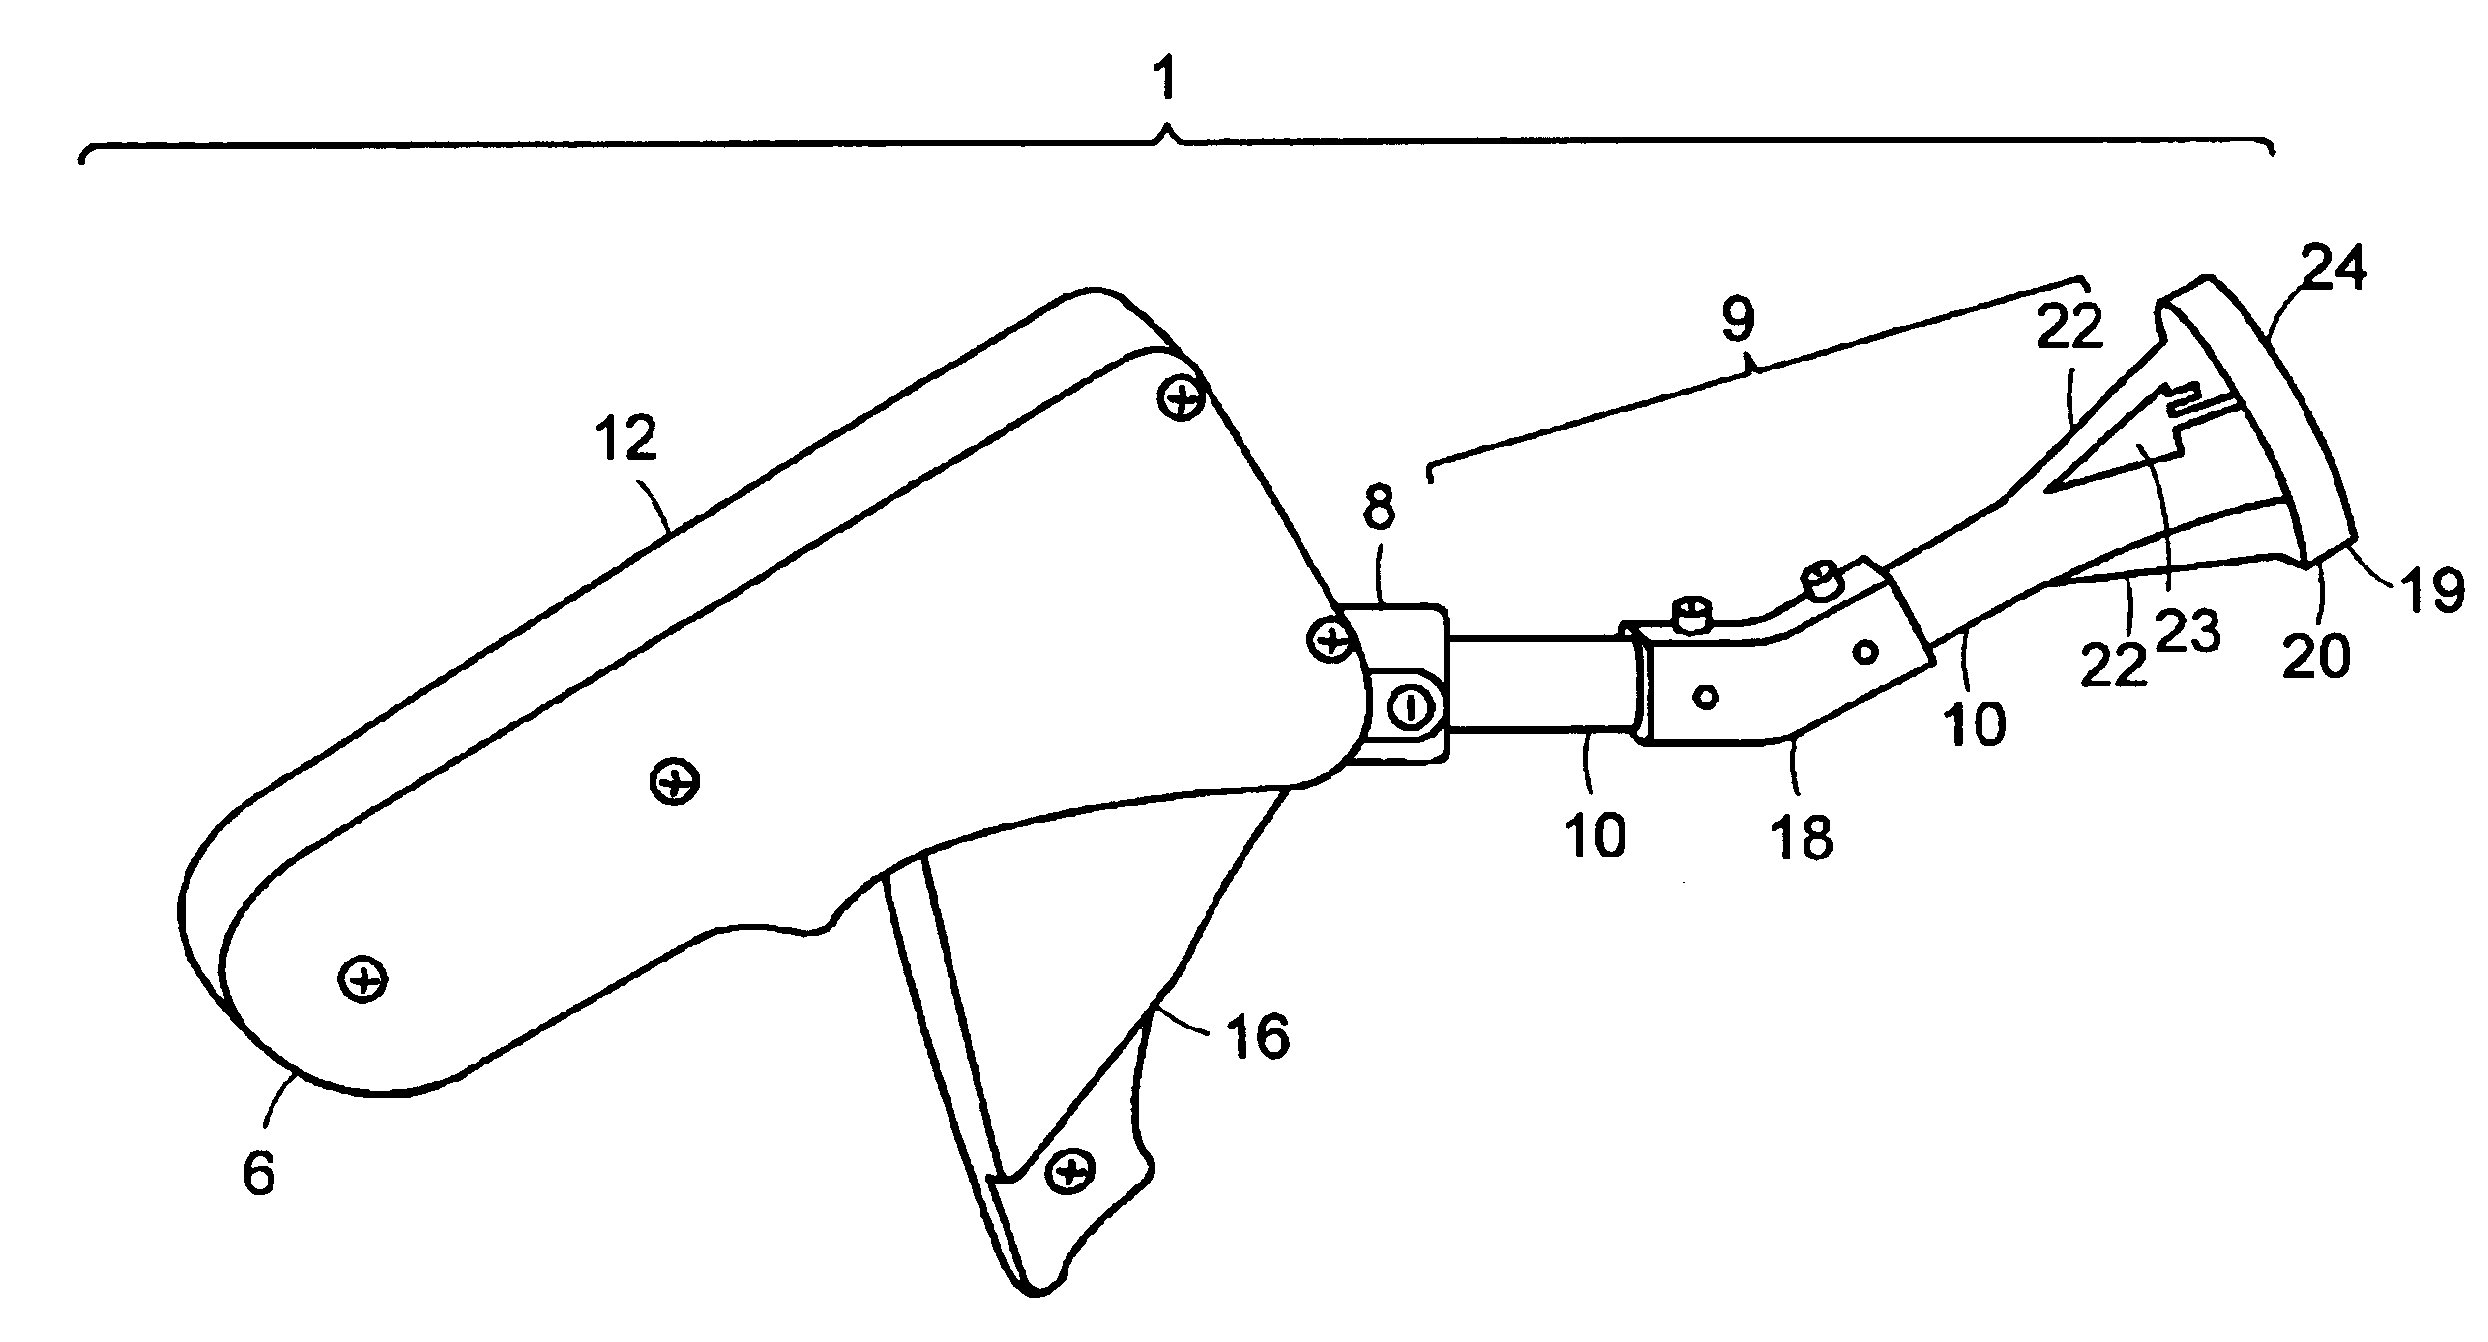 Apparatus and method for surgical suturing with thread management